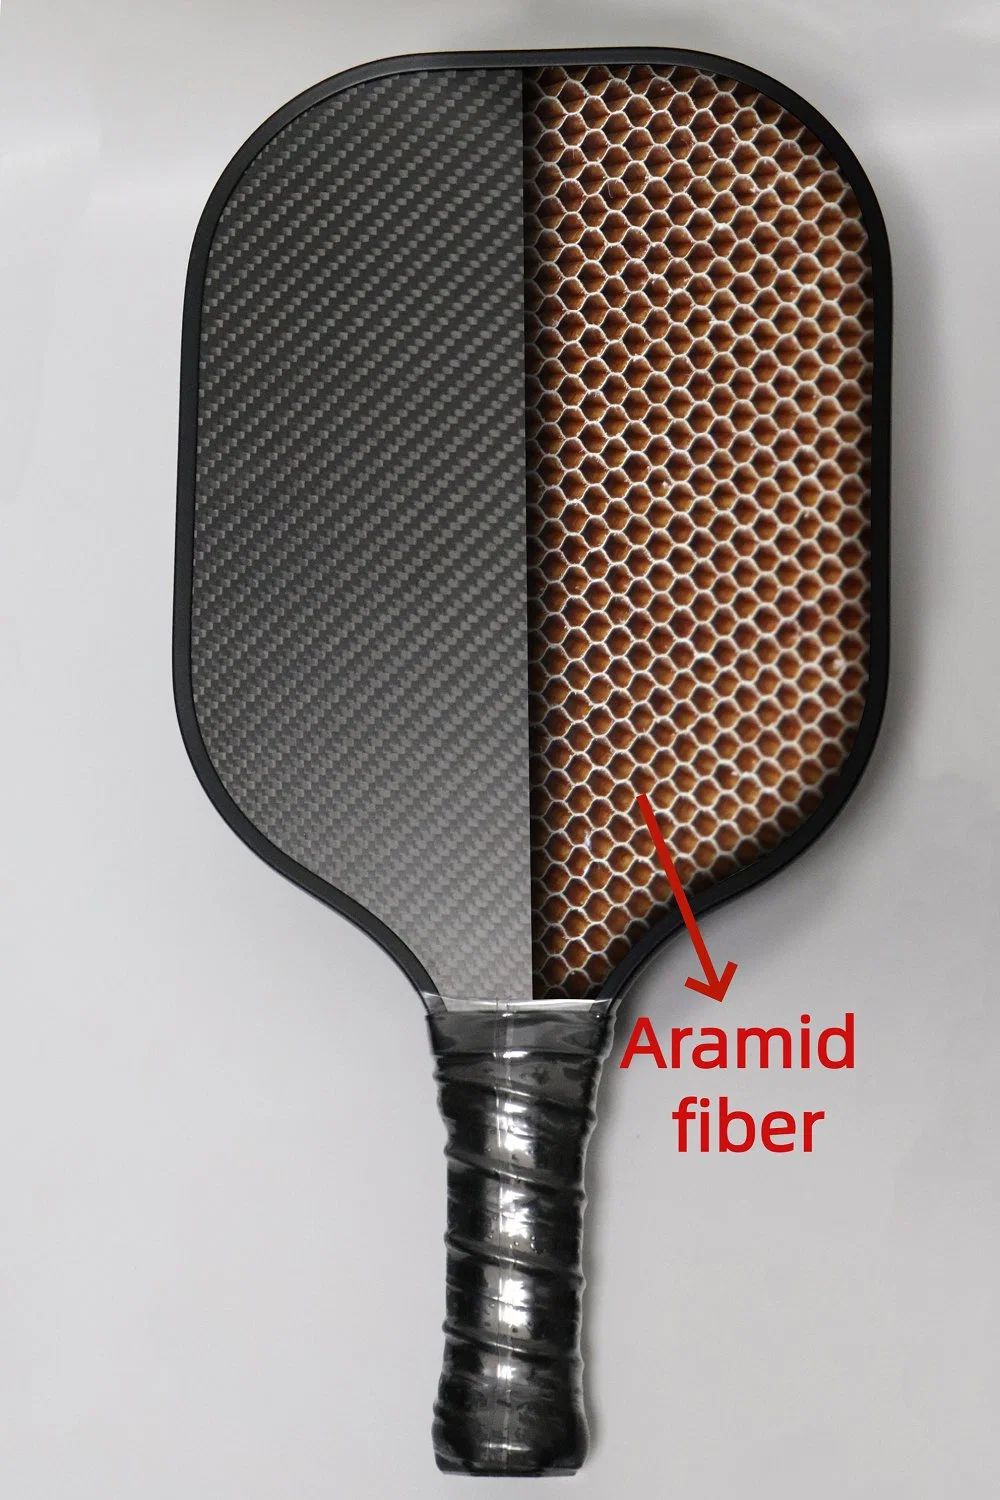 Custom Graphite Carbon Fiber Pickleball Paddle with Polypropylene Hybrid Honeycomb Core Usapa Approved